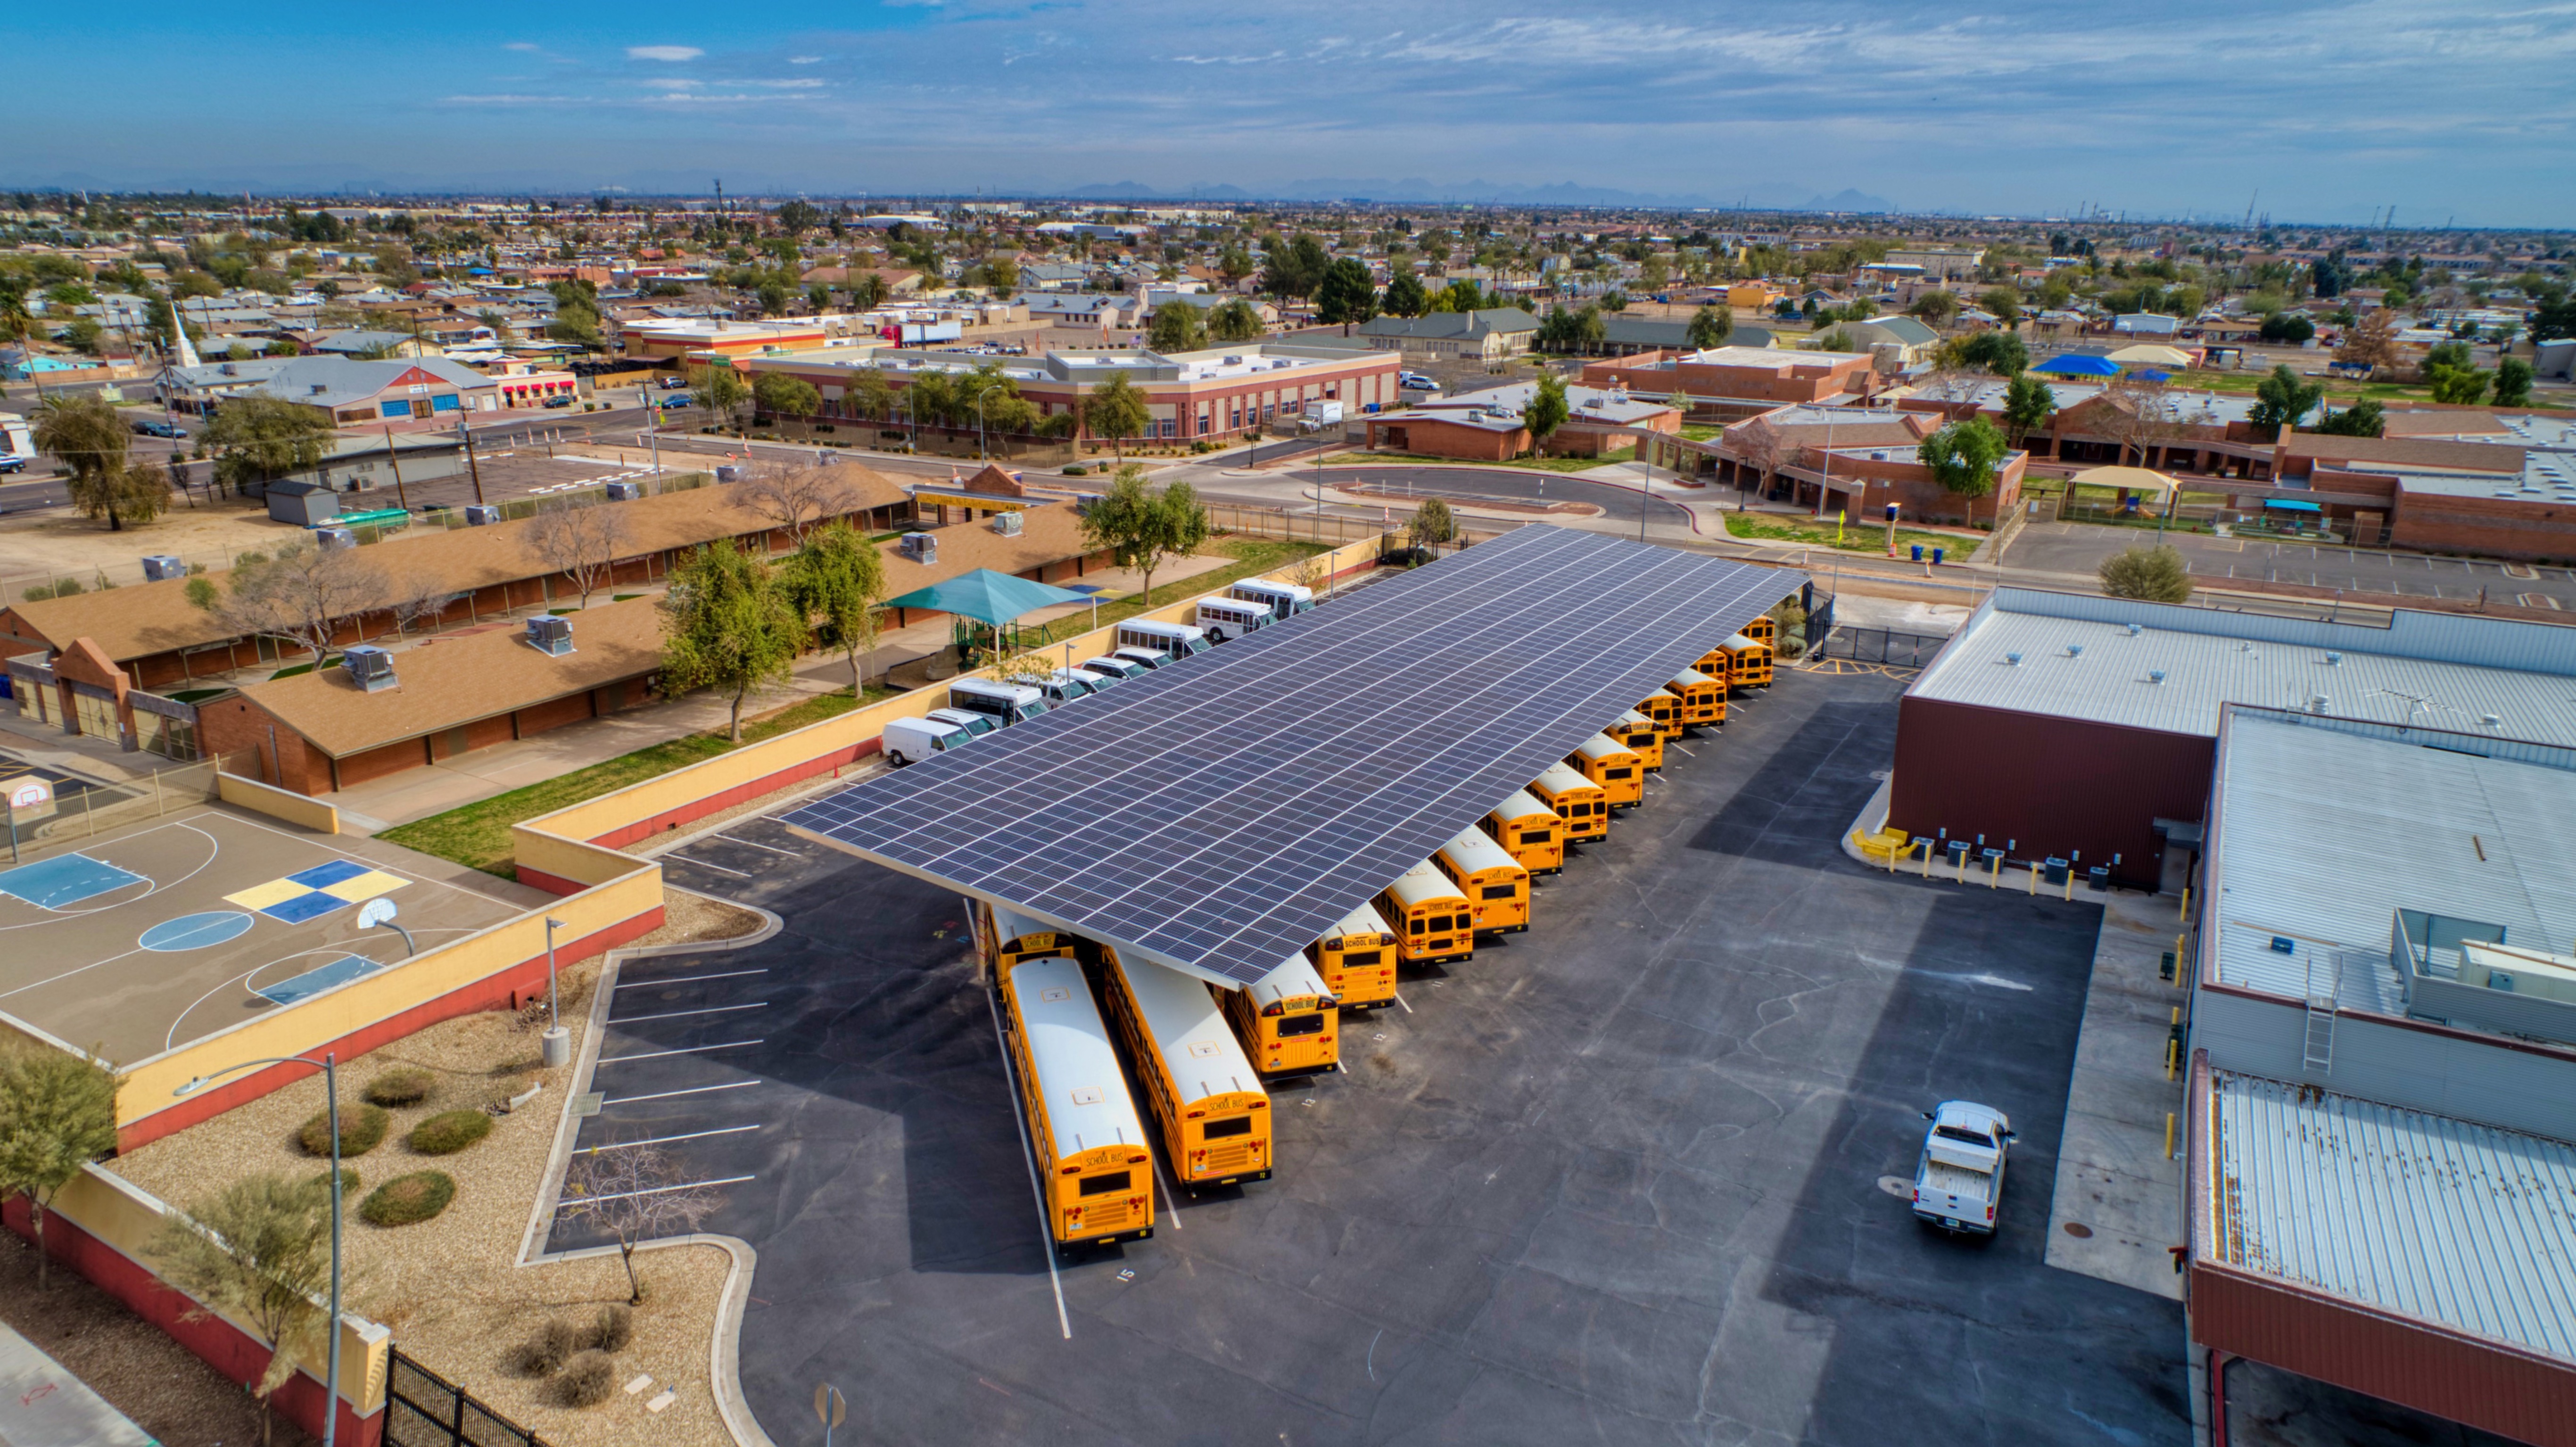 aerial view of a school bus parking lot